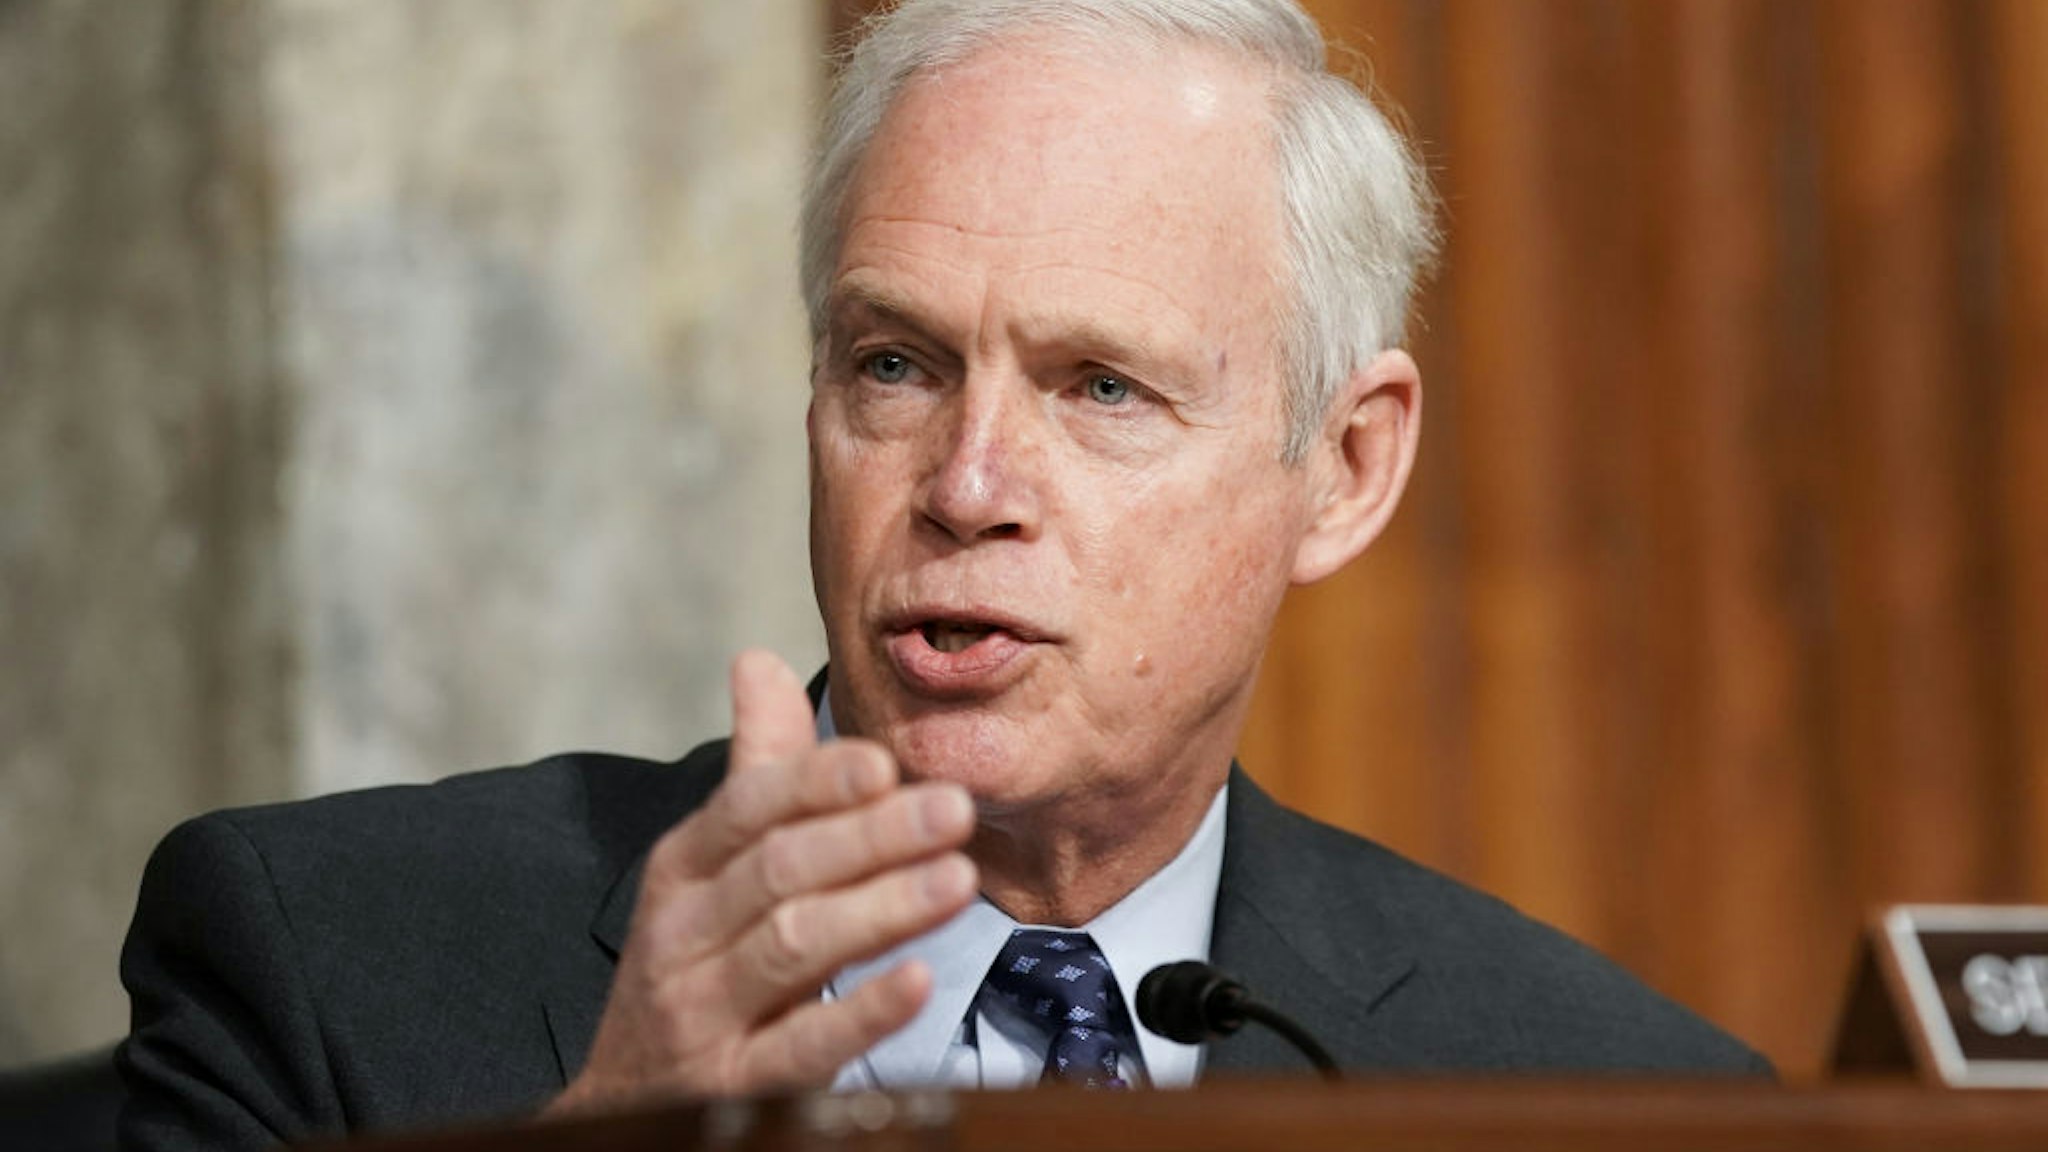 Senator Ron Johnson, a Republican from Wisconsin, speaks during a Senate Homeland and Governmental Affairs and Rules and Administration Committees hearing in Washington, D.C., U.S., on Wednesday, March 3, 2021. The commander of the D.C. National Guard said it took more than three hours for senior military leaders to approve a request to send troops to the U.S. Capitol during the Jan. 6 riots, despite a "frantic" plea from the Capitol Police chief for immediate emergency assistance.